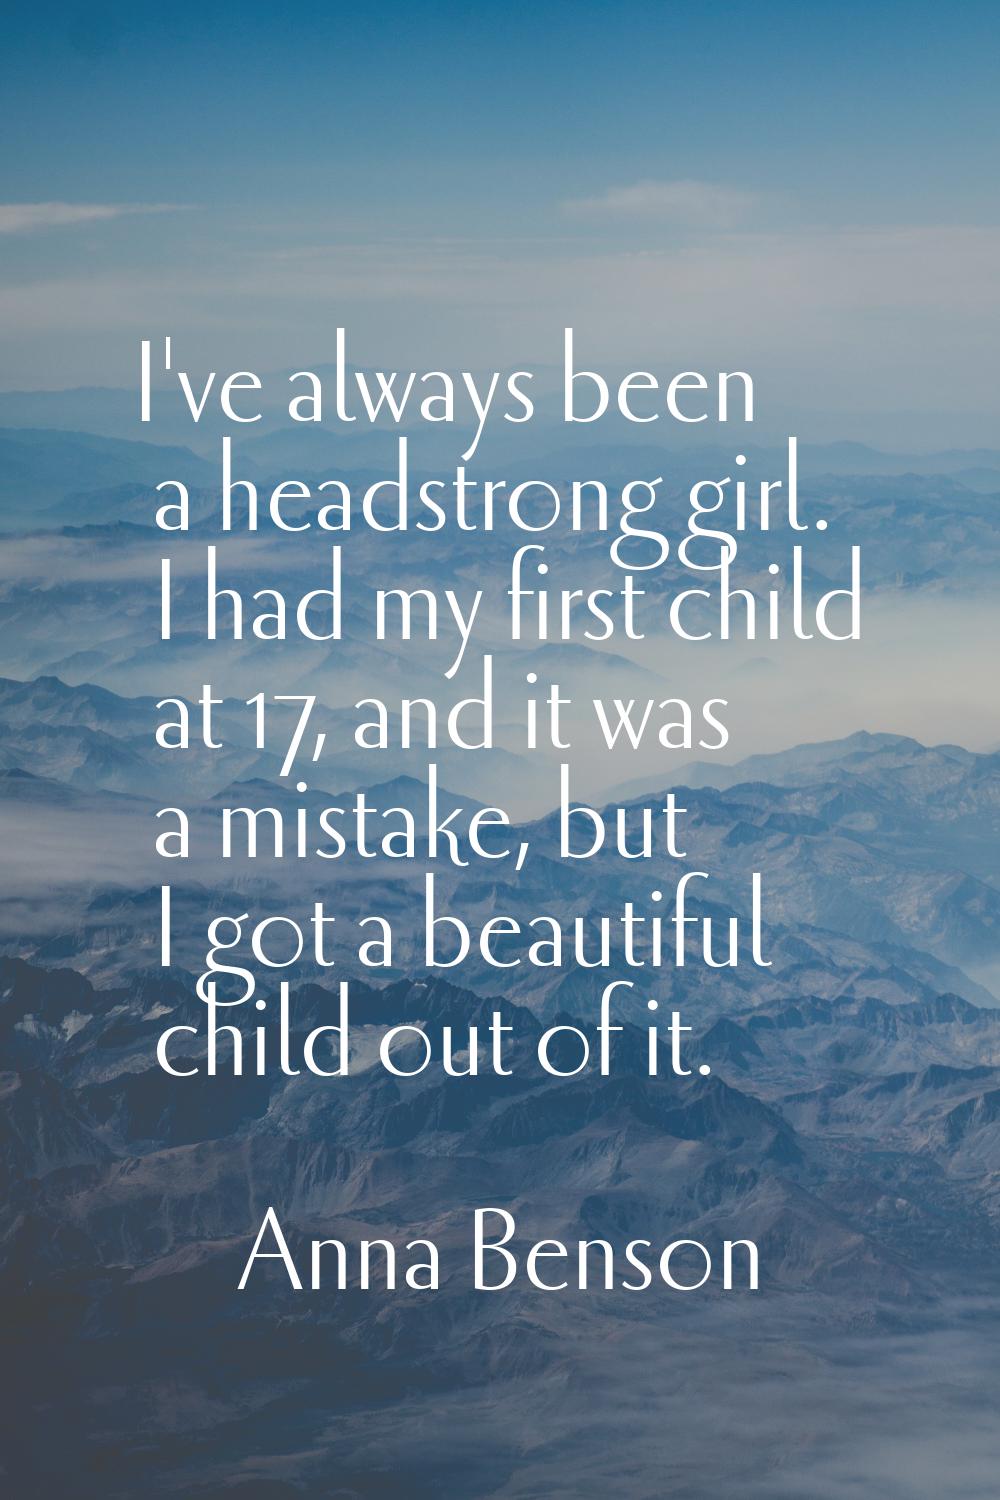 I've always been a headstrong girl. I had my first child at 17, and it was a mistake, but I got a b